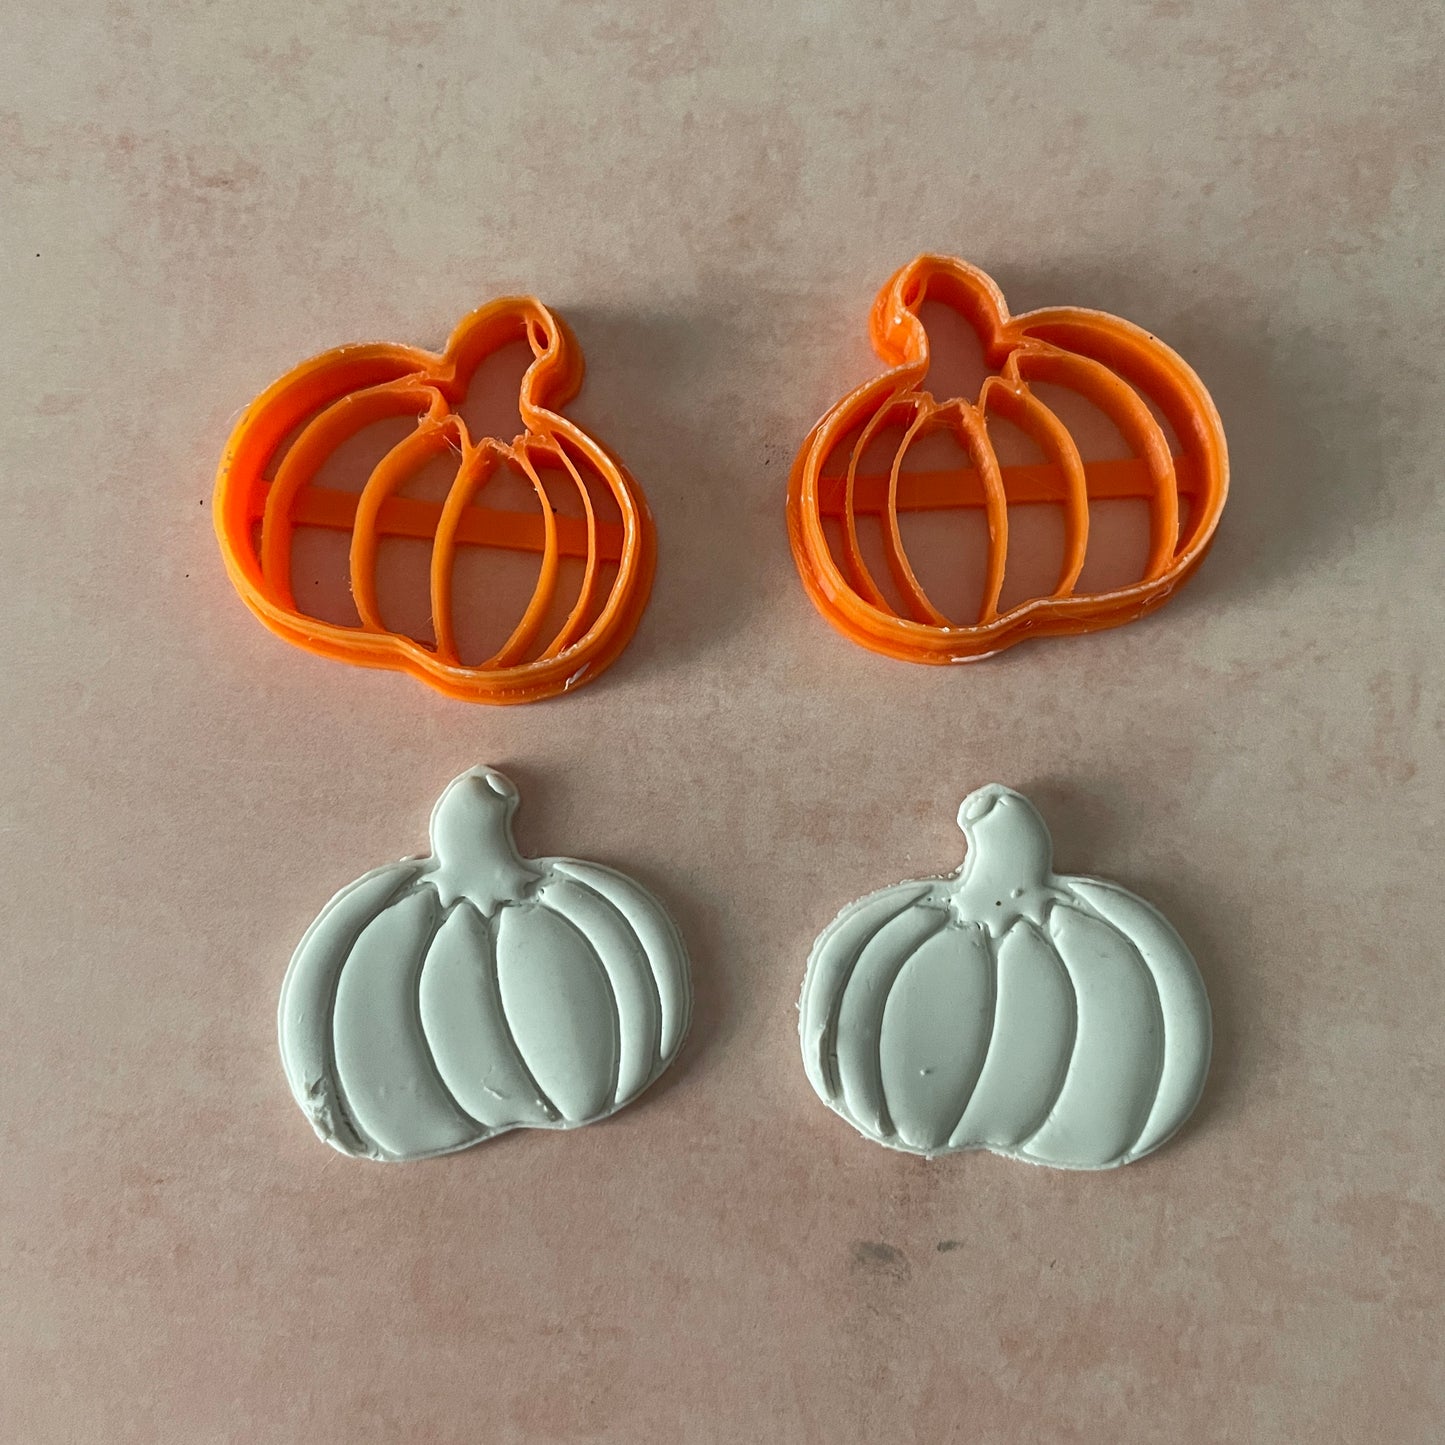 Short Pumpkin mirrored polymer clay cutter set for earrings and more